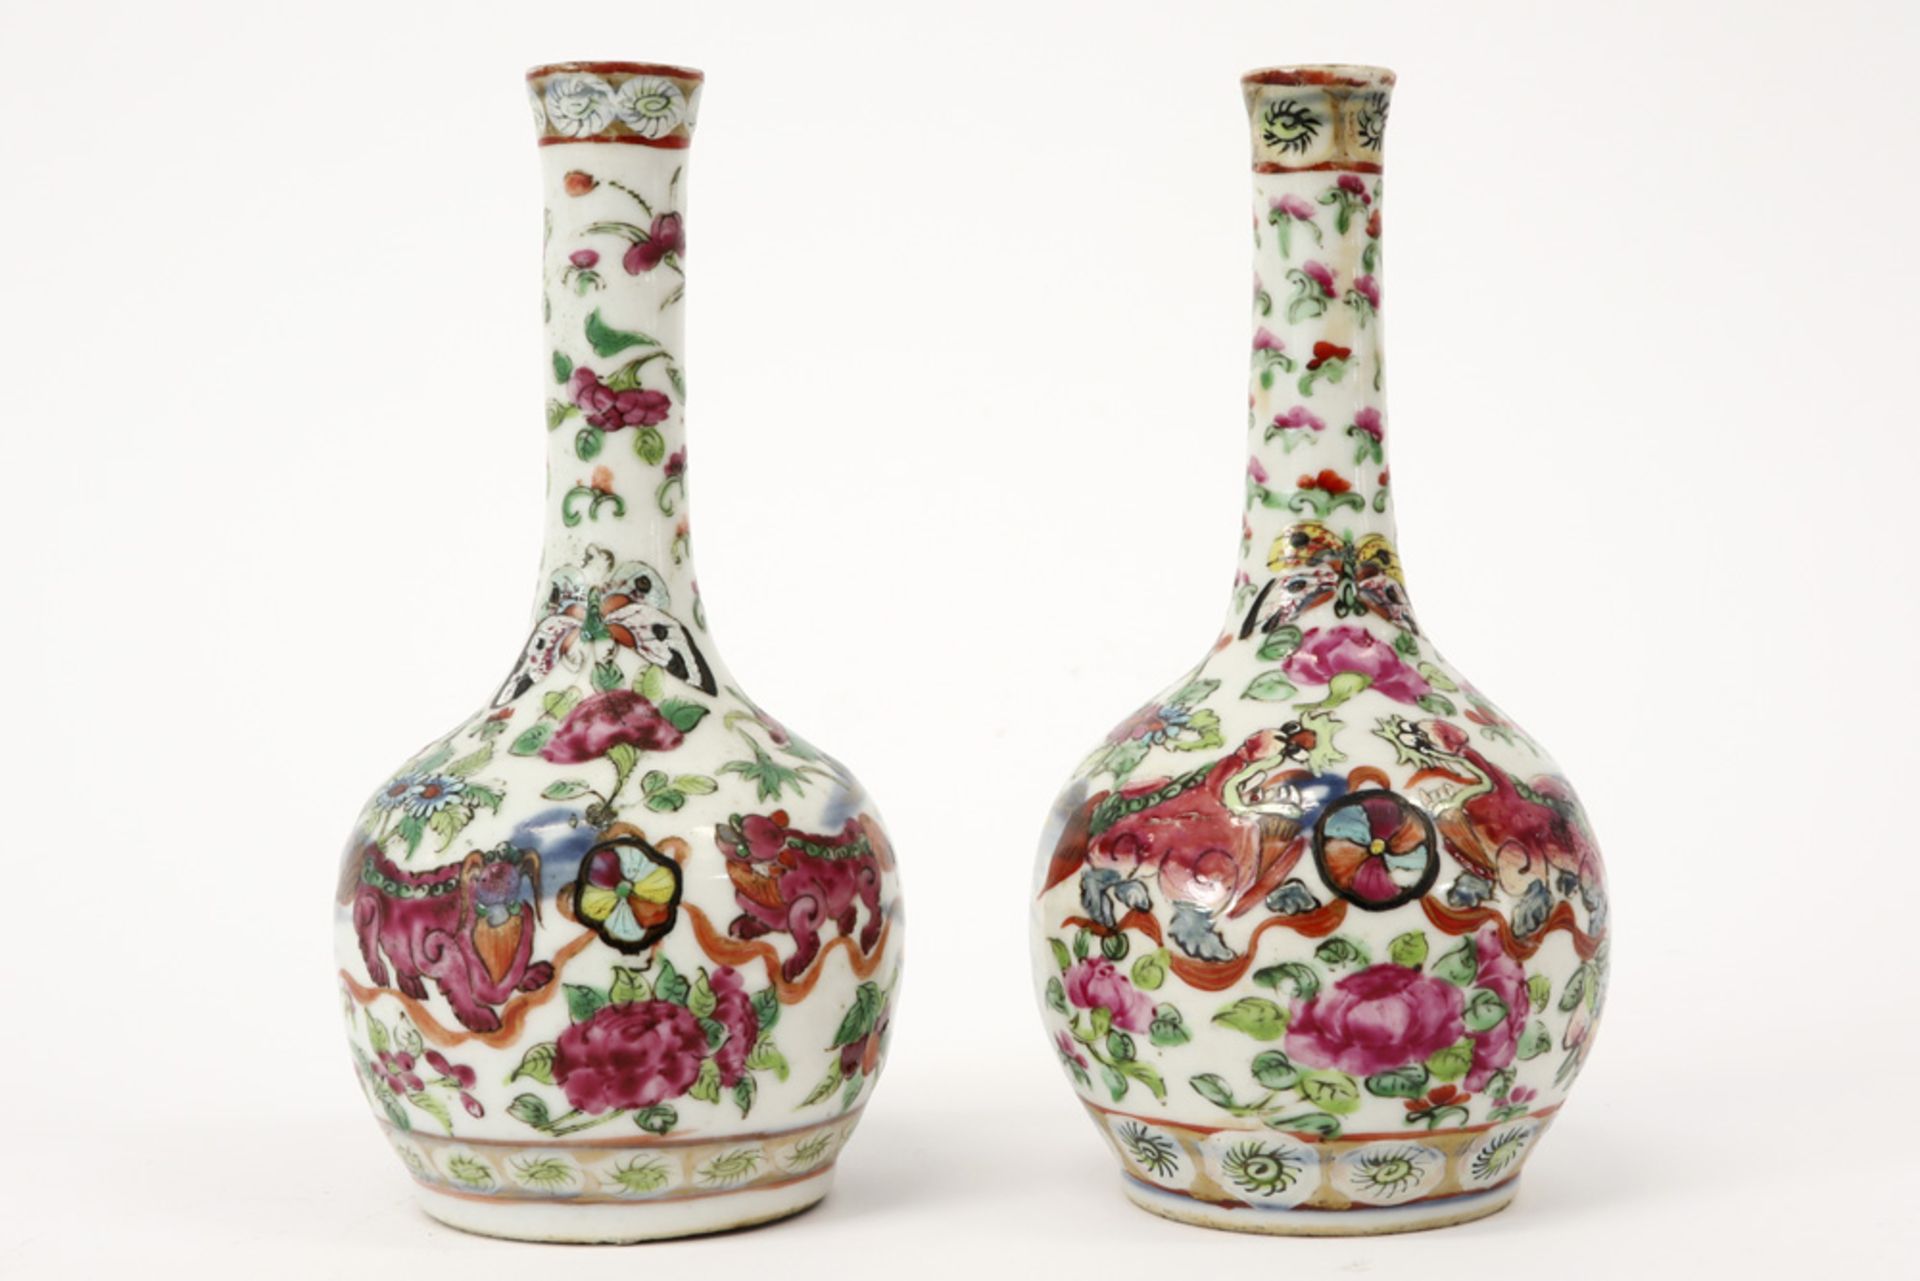 pair of 19th Cent. Chinese vases in porcelain with a blue-white and Cantonese decor with temple